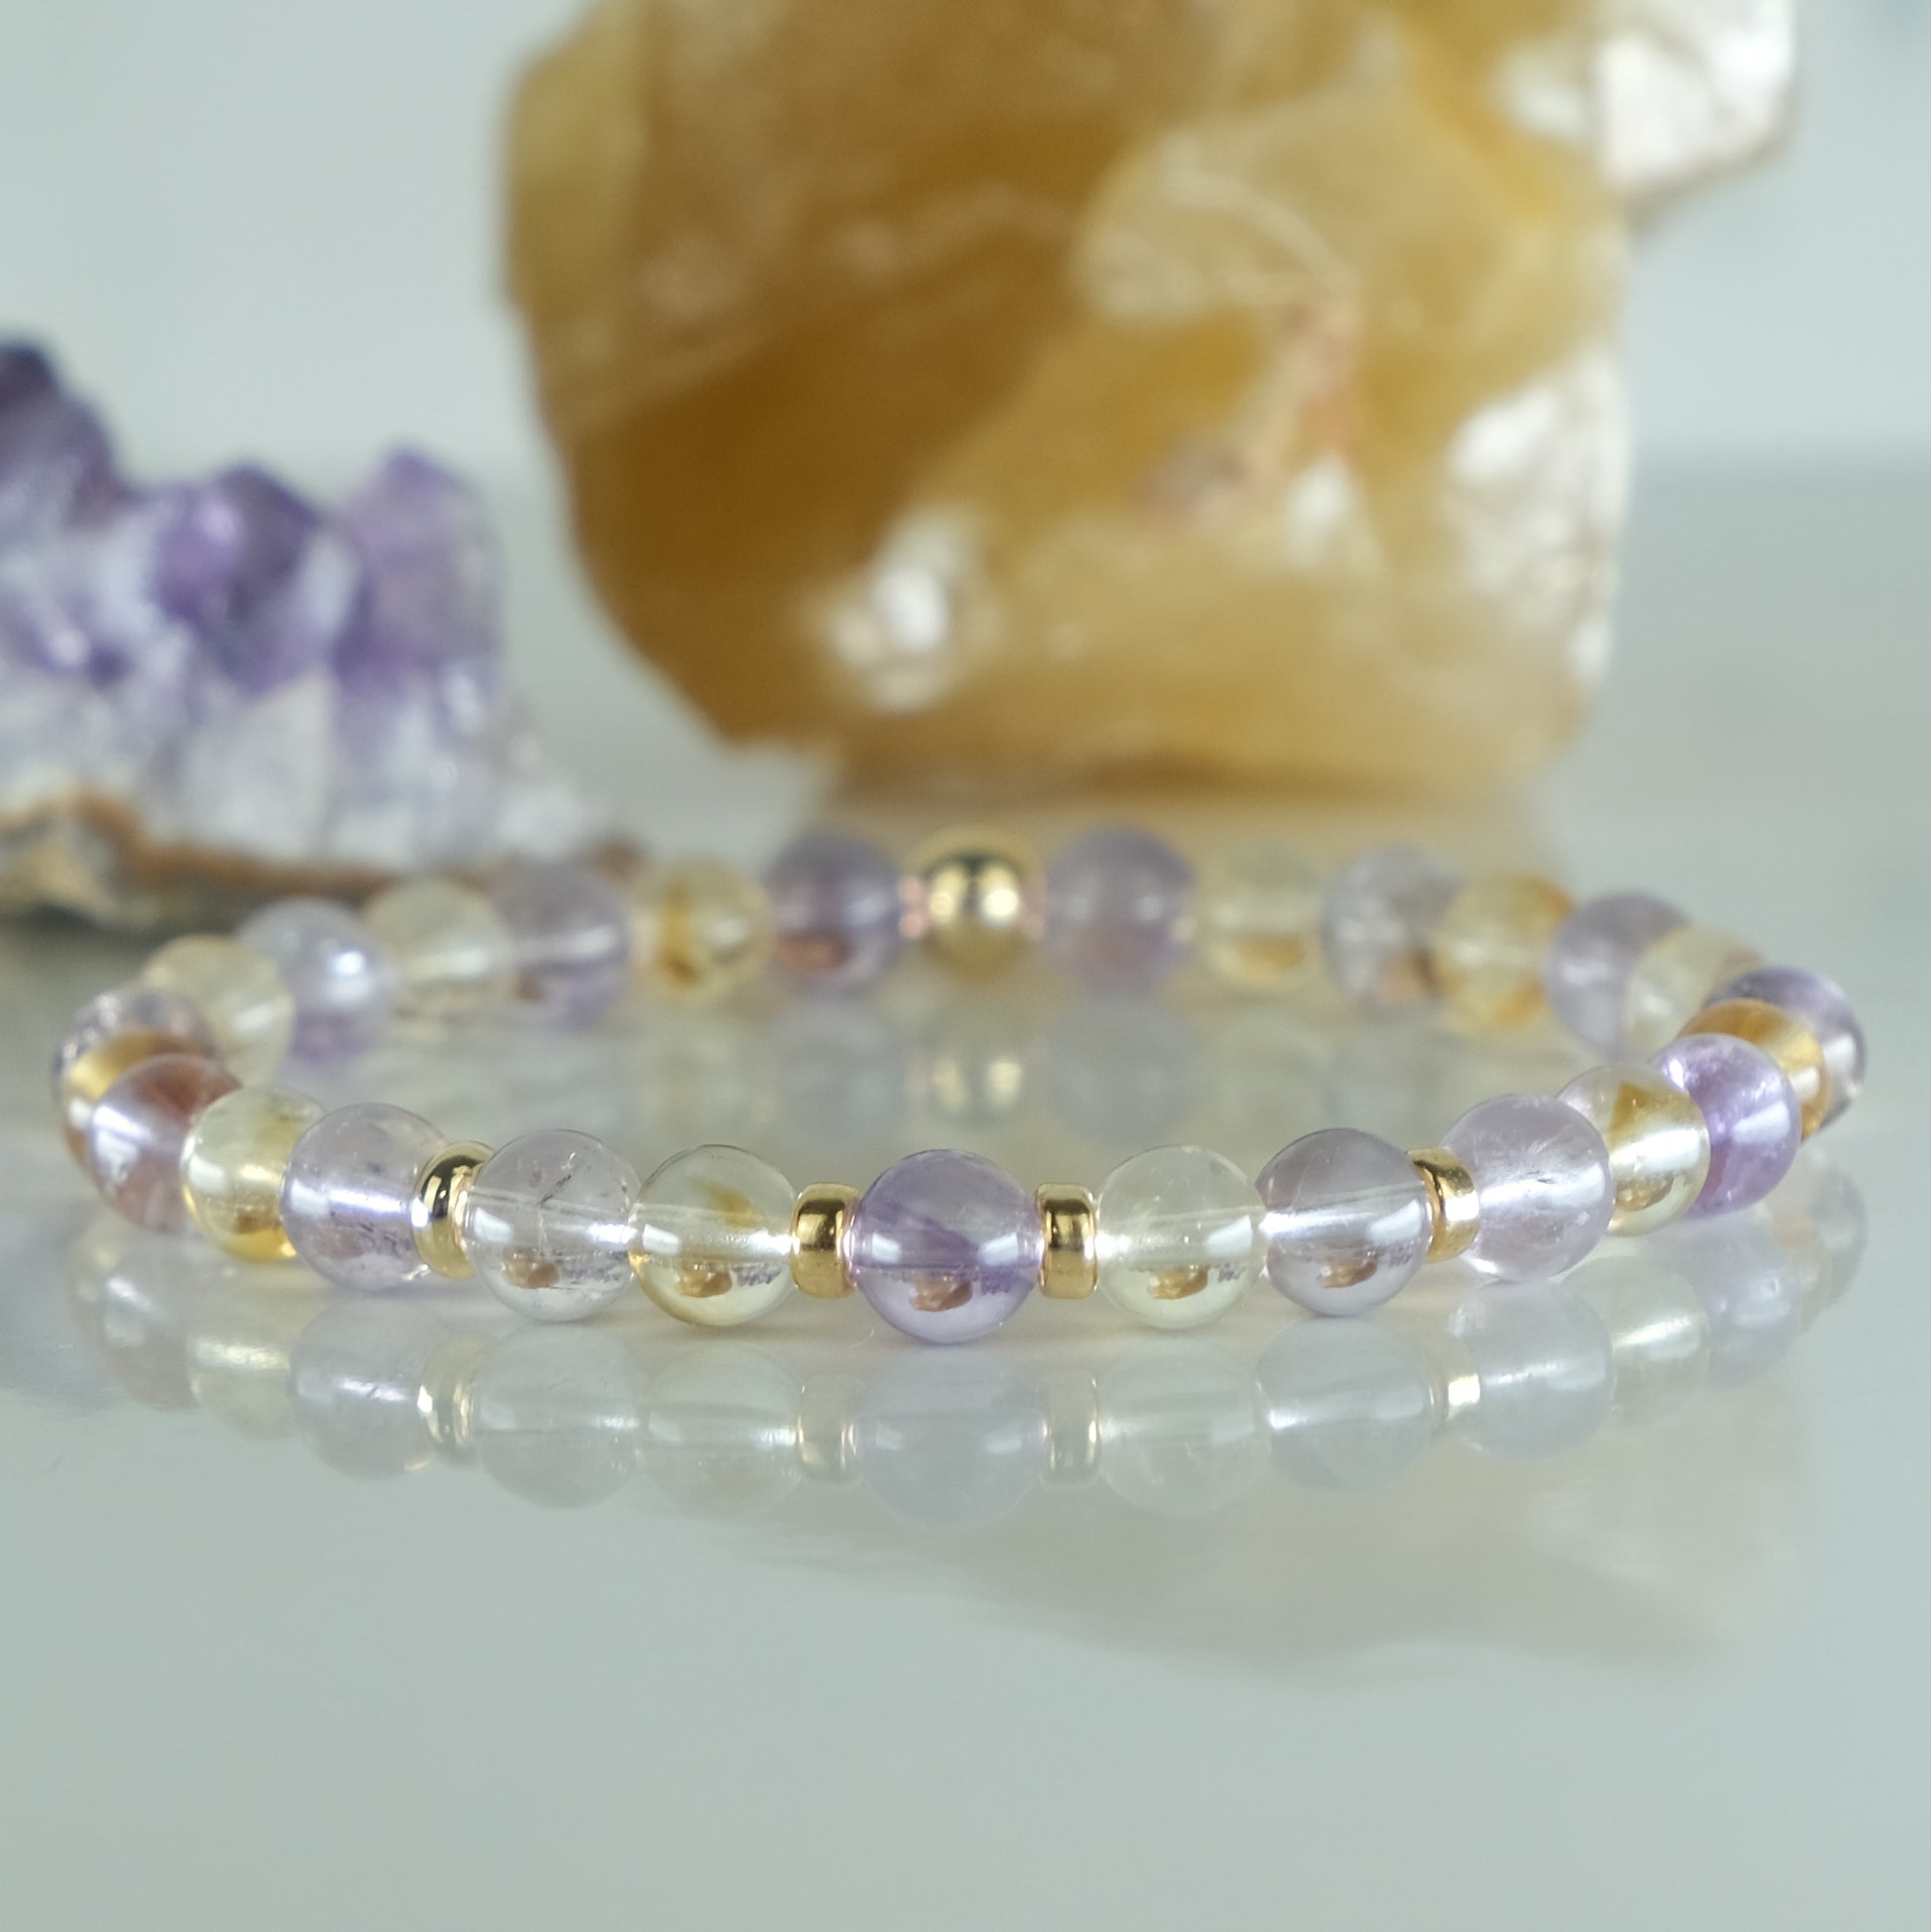 6mm amethyst and citrine gemstone bracelet with gold filled accents